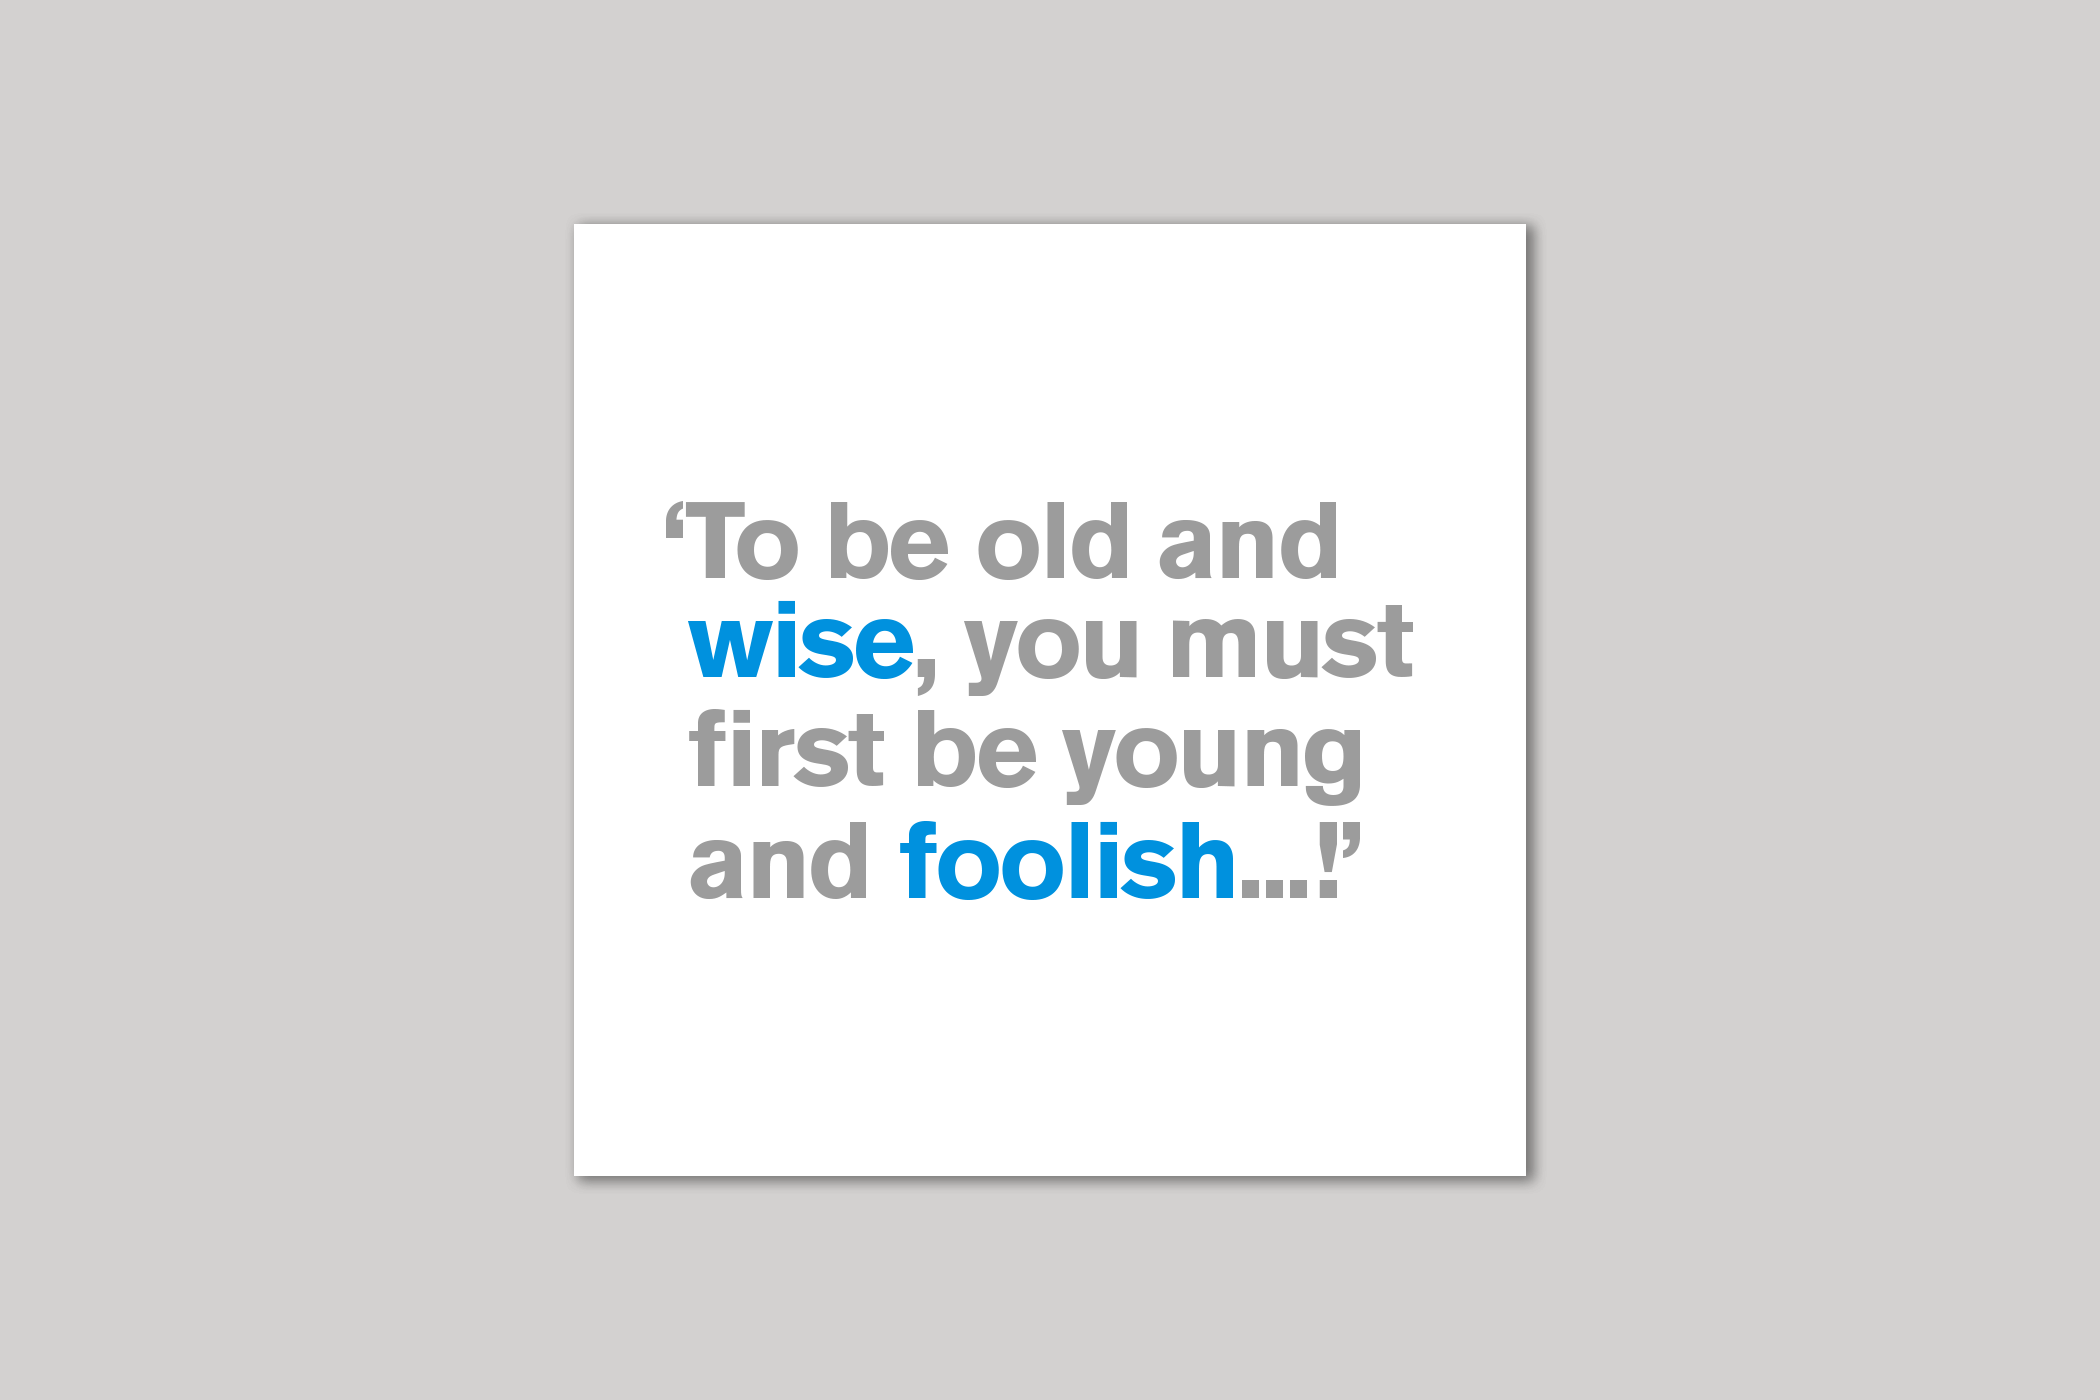 Old And Wise   21st card from Lyric range of quotation cards by Icon.